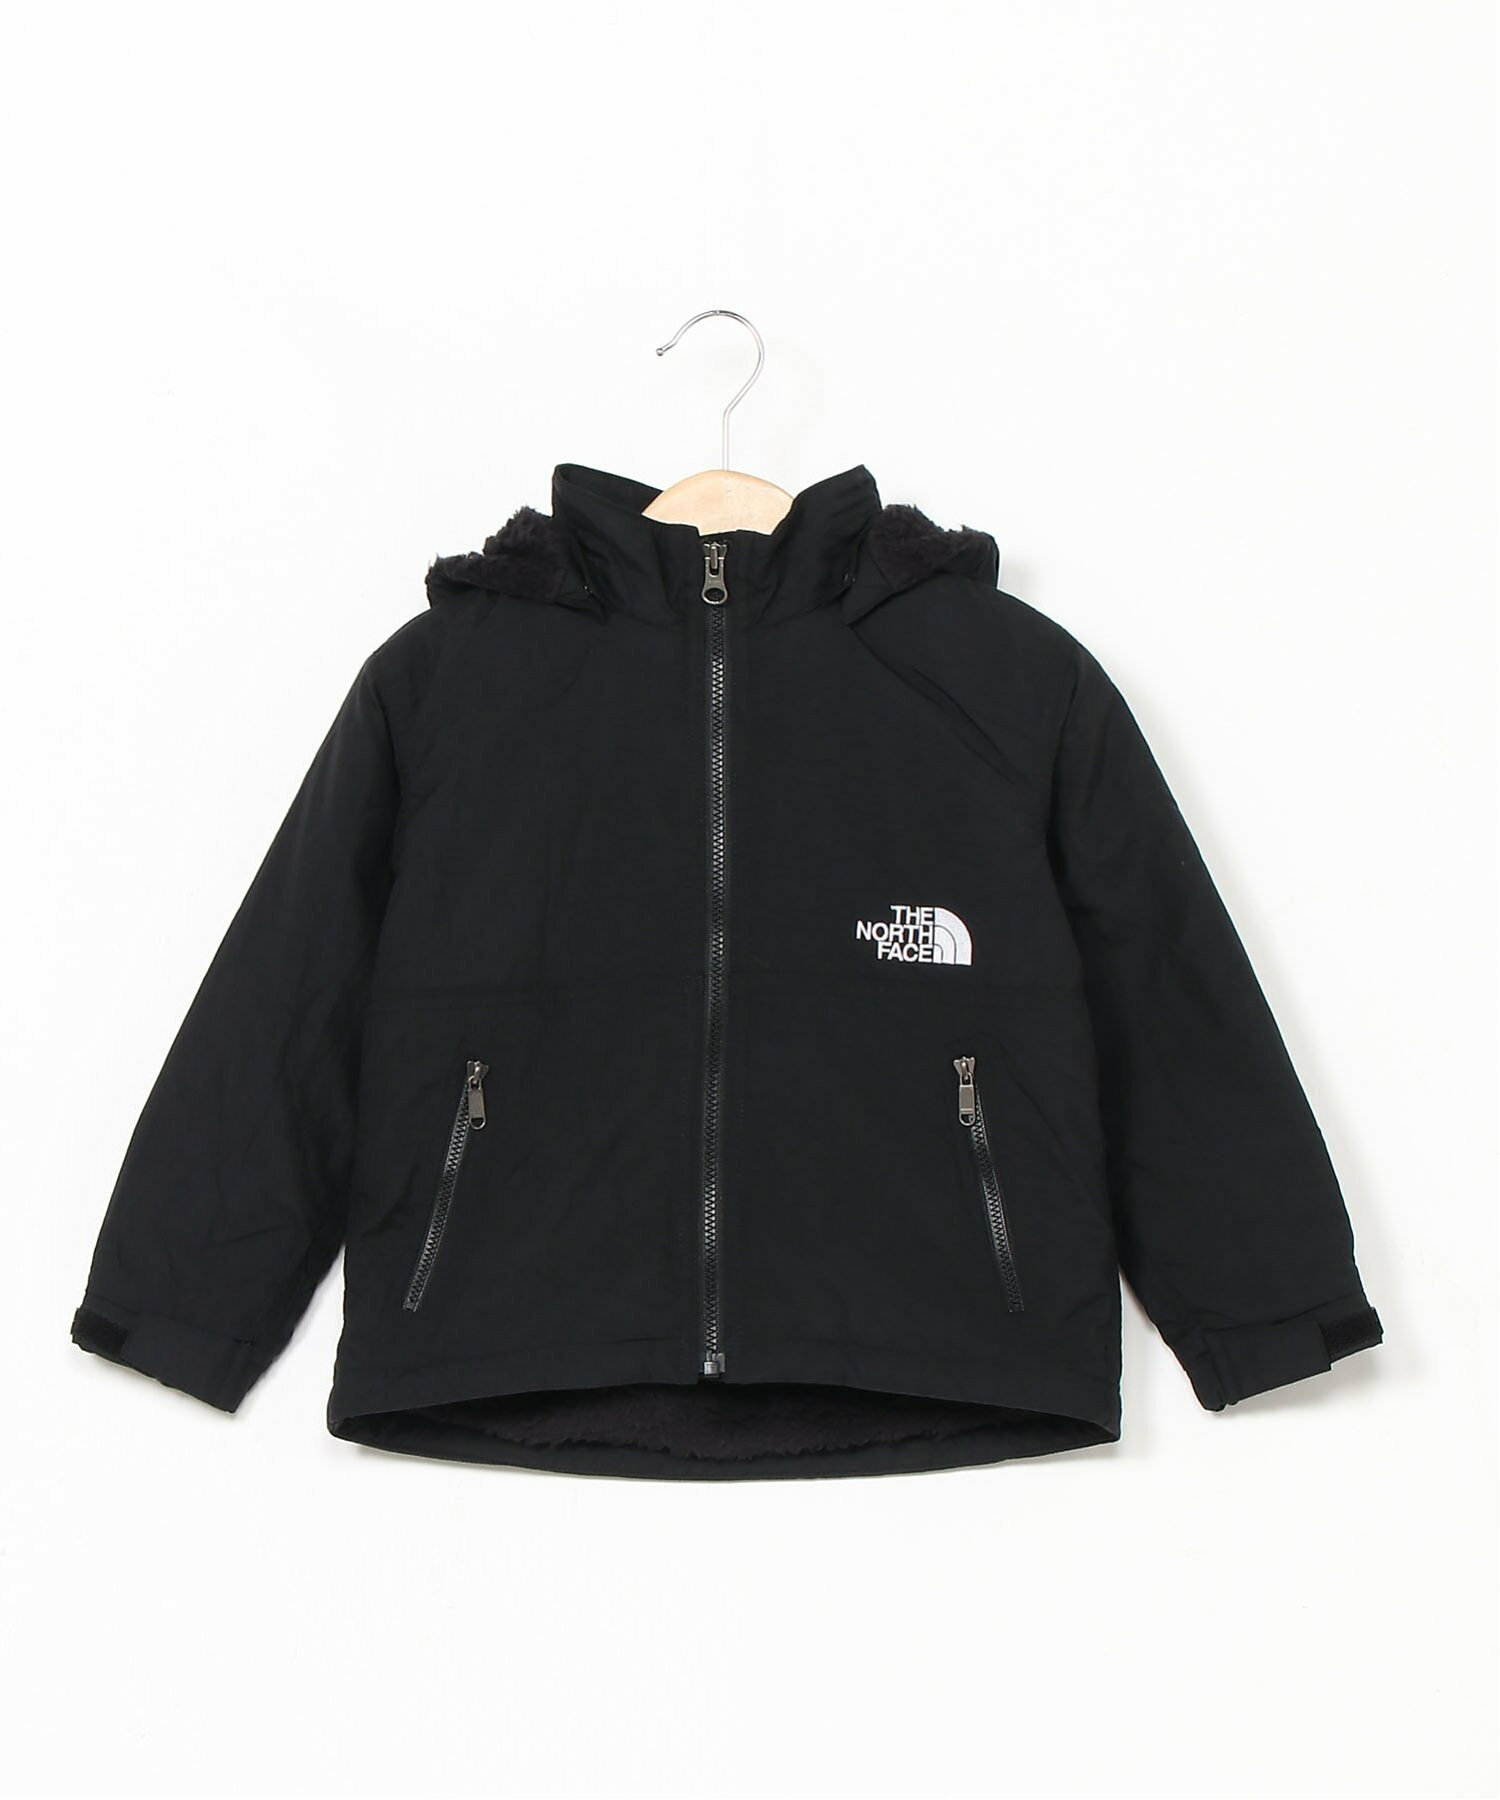 THE NORTH FACE/NPJ72257 コンパクトノマドジャケット